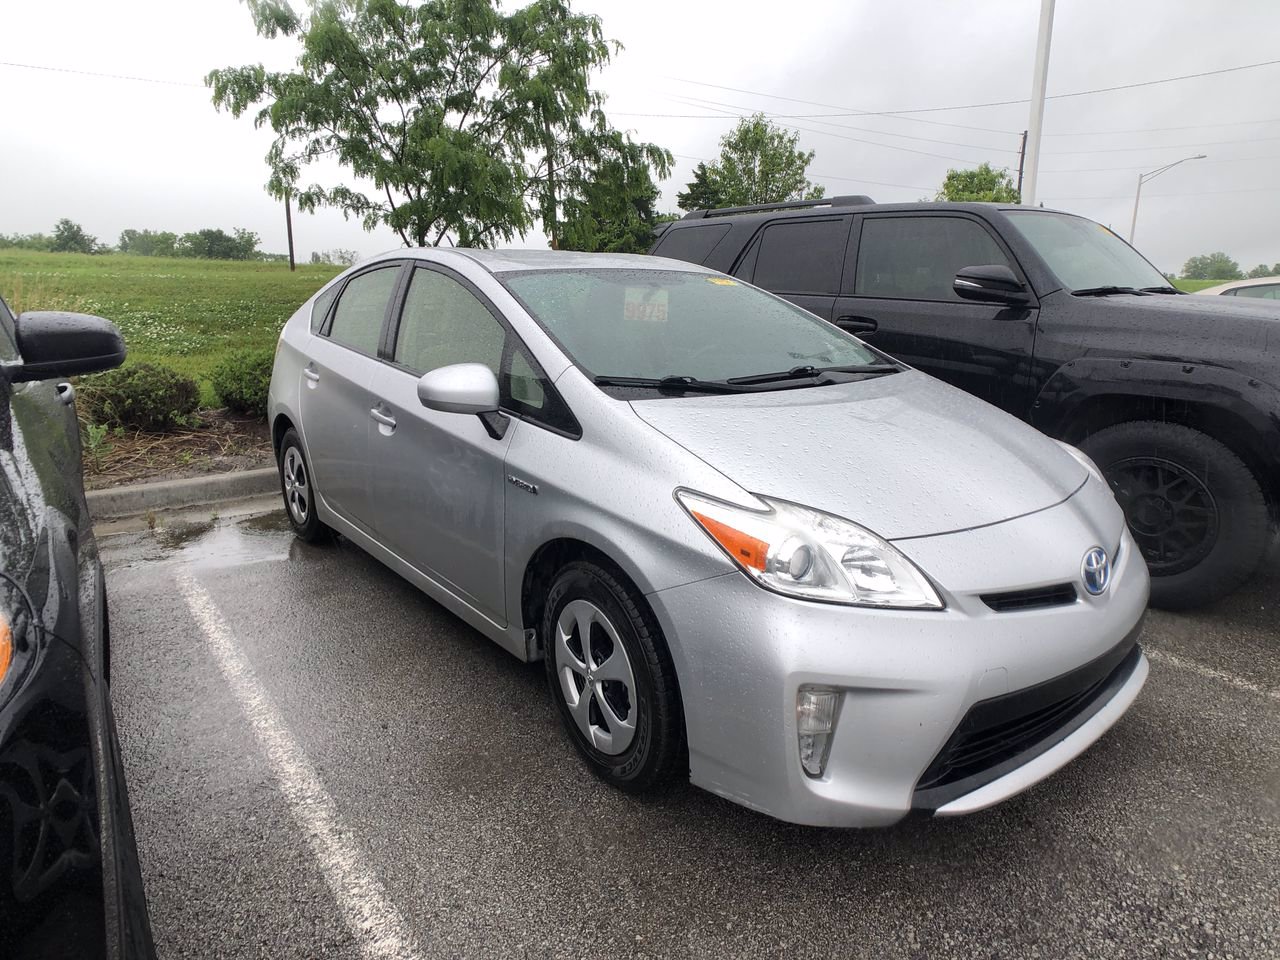 PreOwned 2012 Toyota Prius Two in Kansas City CO70920C